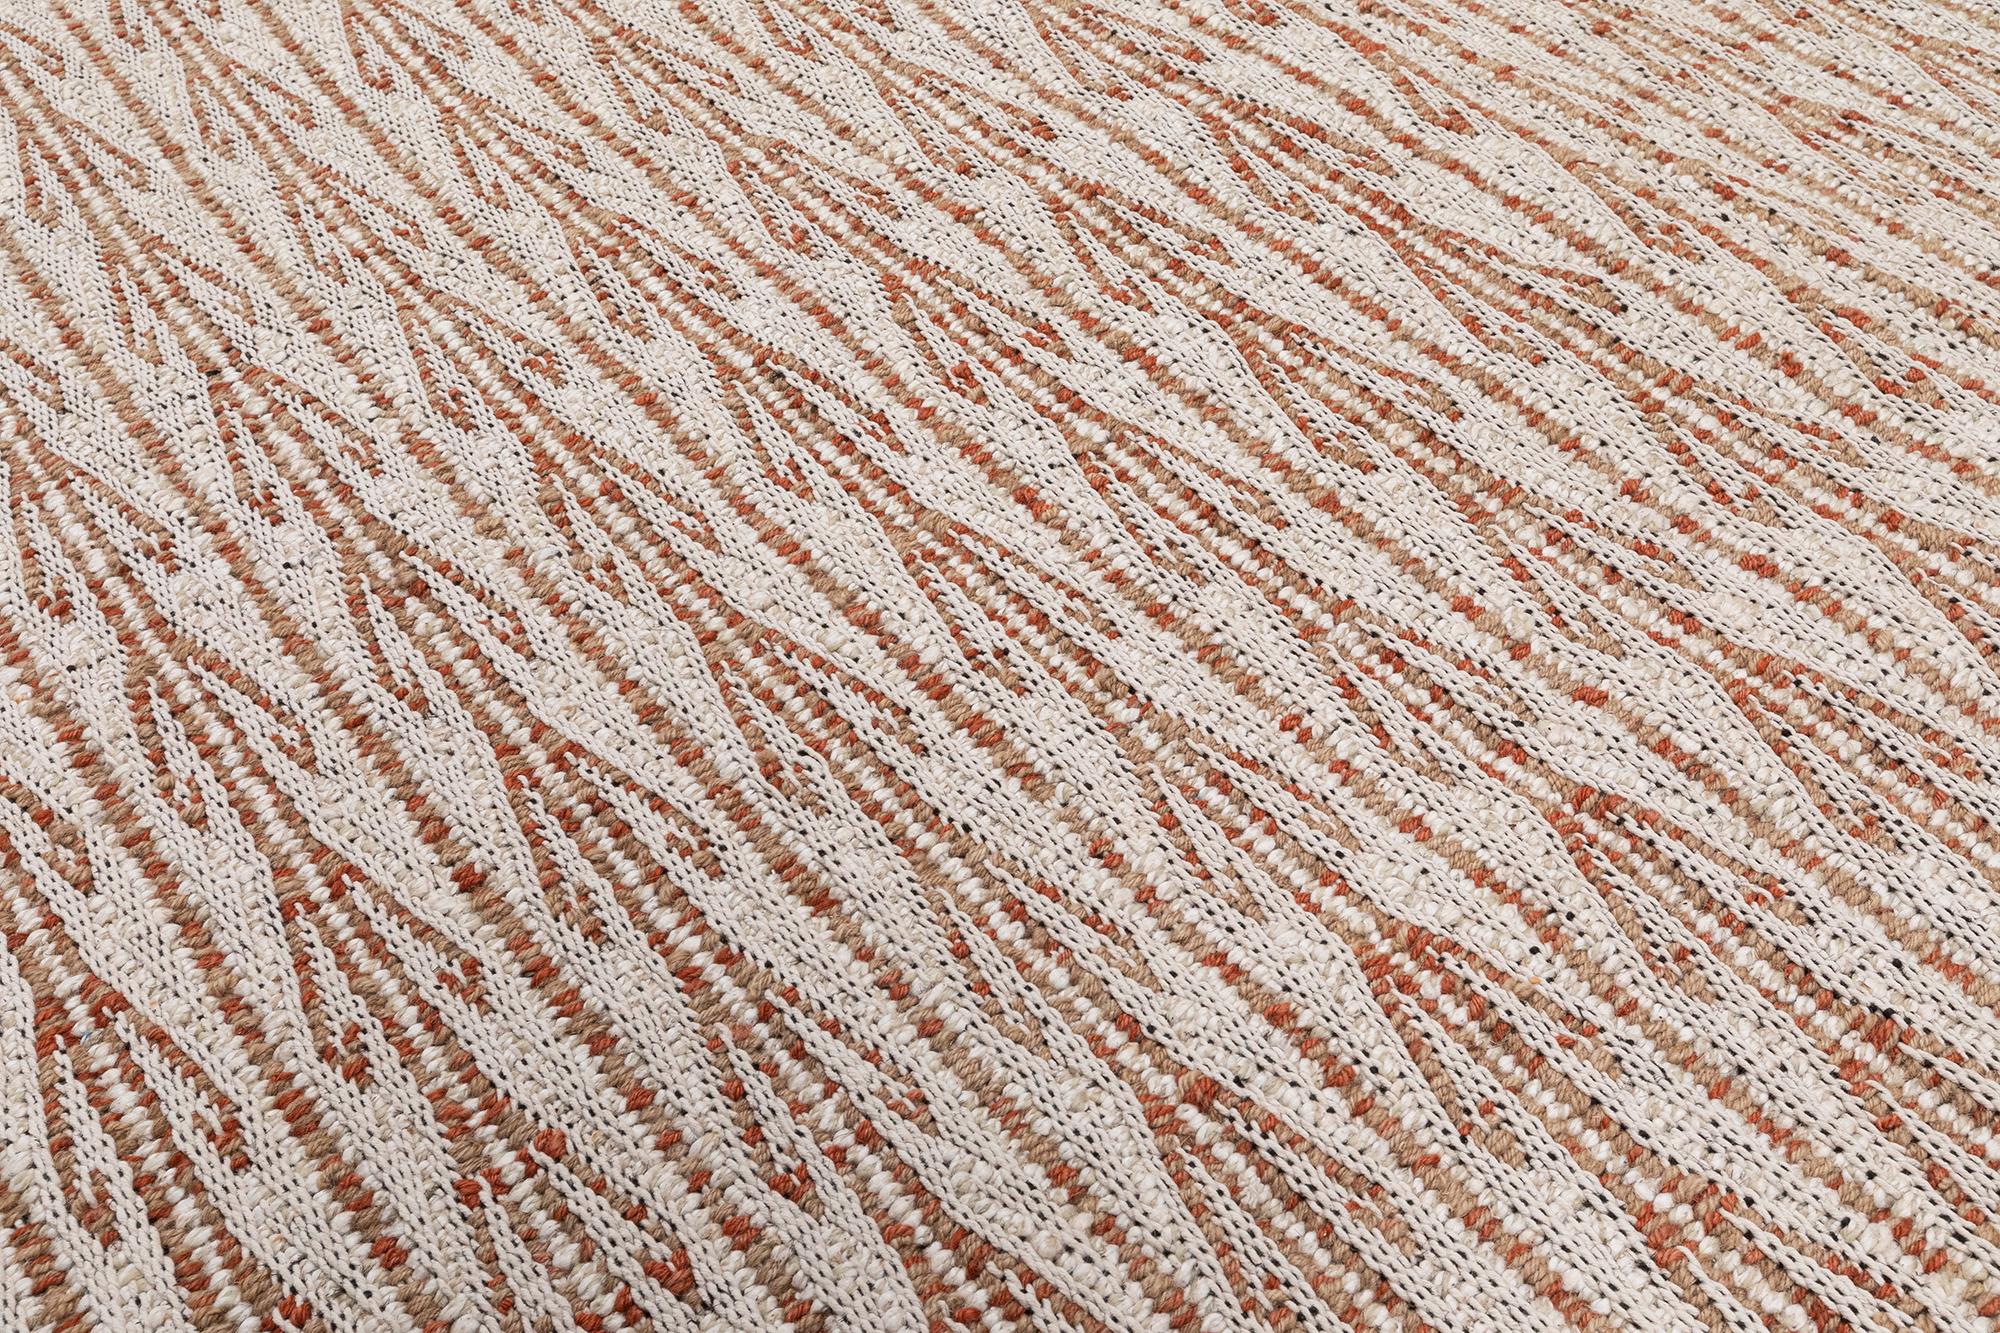 NASIRI is ushering in a new era of flatweave rugs, ones marked by a new texture and dimension, providing a luxurious look never before seen in other flatweaves.  We are continuously expanding our collections by being innovative in design and